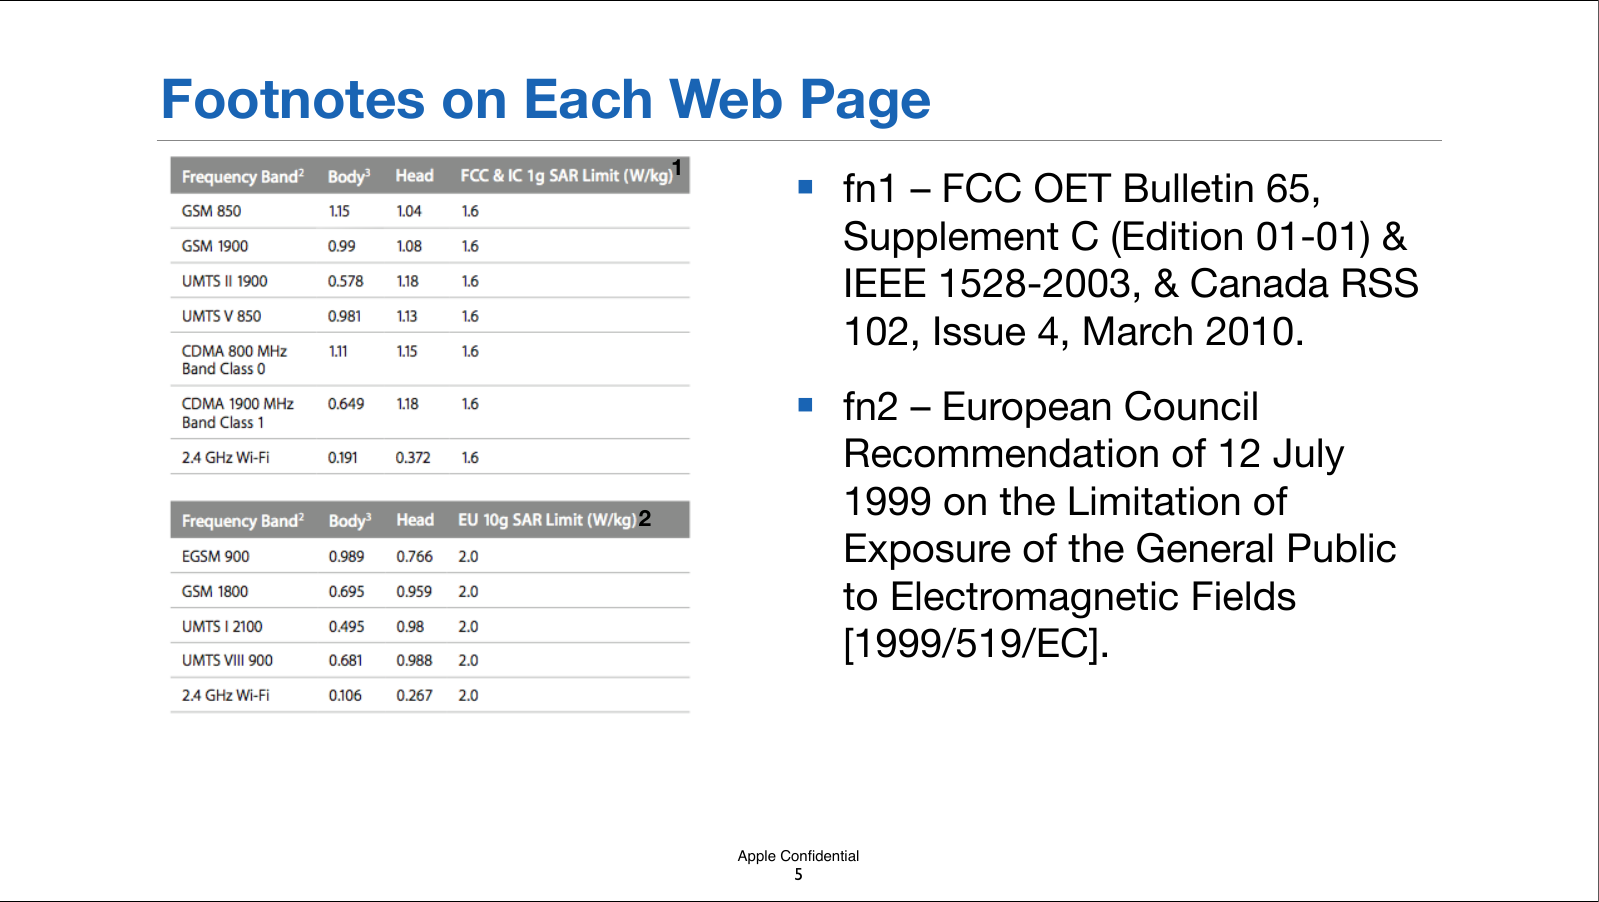 Apple ConﬁdentialFootnotes on Each Web Page■fn1 –!FCC OET Bulletin 65, Supplement C (Edition 01-01) &amp; IEEE 1528-2003, &amp; Canada RSS 102, Issue 4, March 2010. ■fn2 – European Council Recommendation of 12 July 1999 on the Limitation of Exposure of the General Public to Electromagnetic Fields [1999/519/EC].125